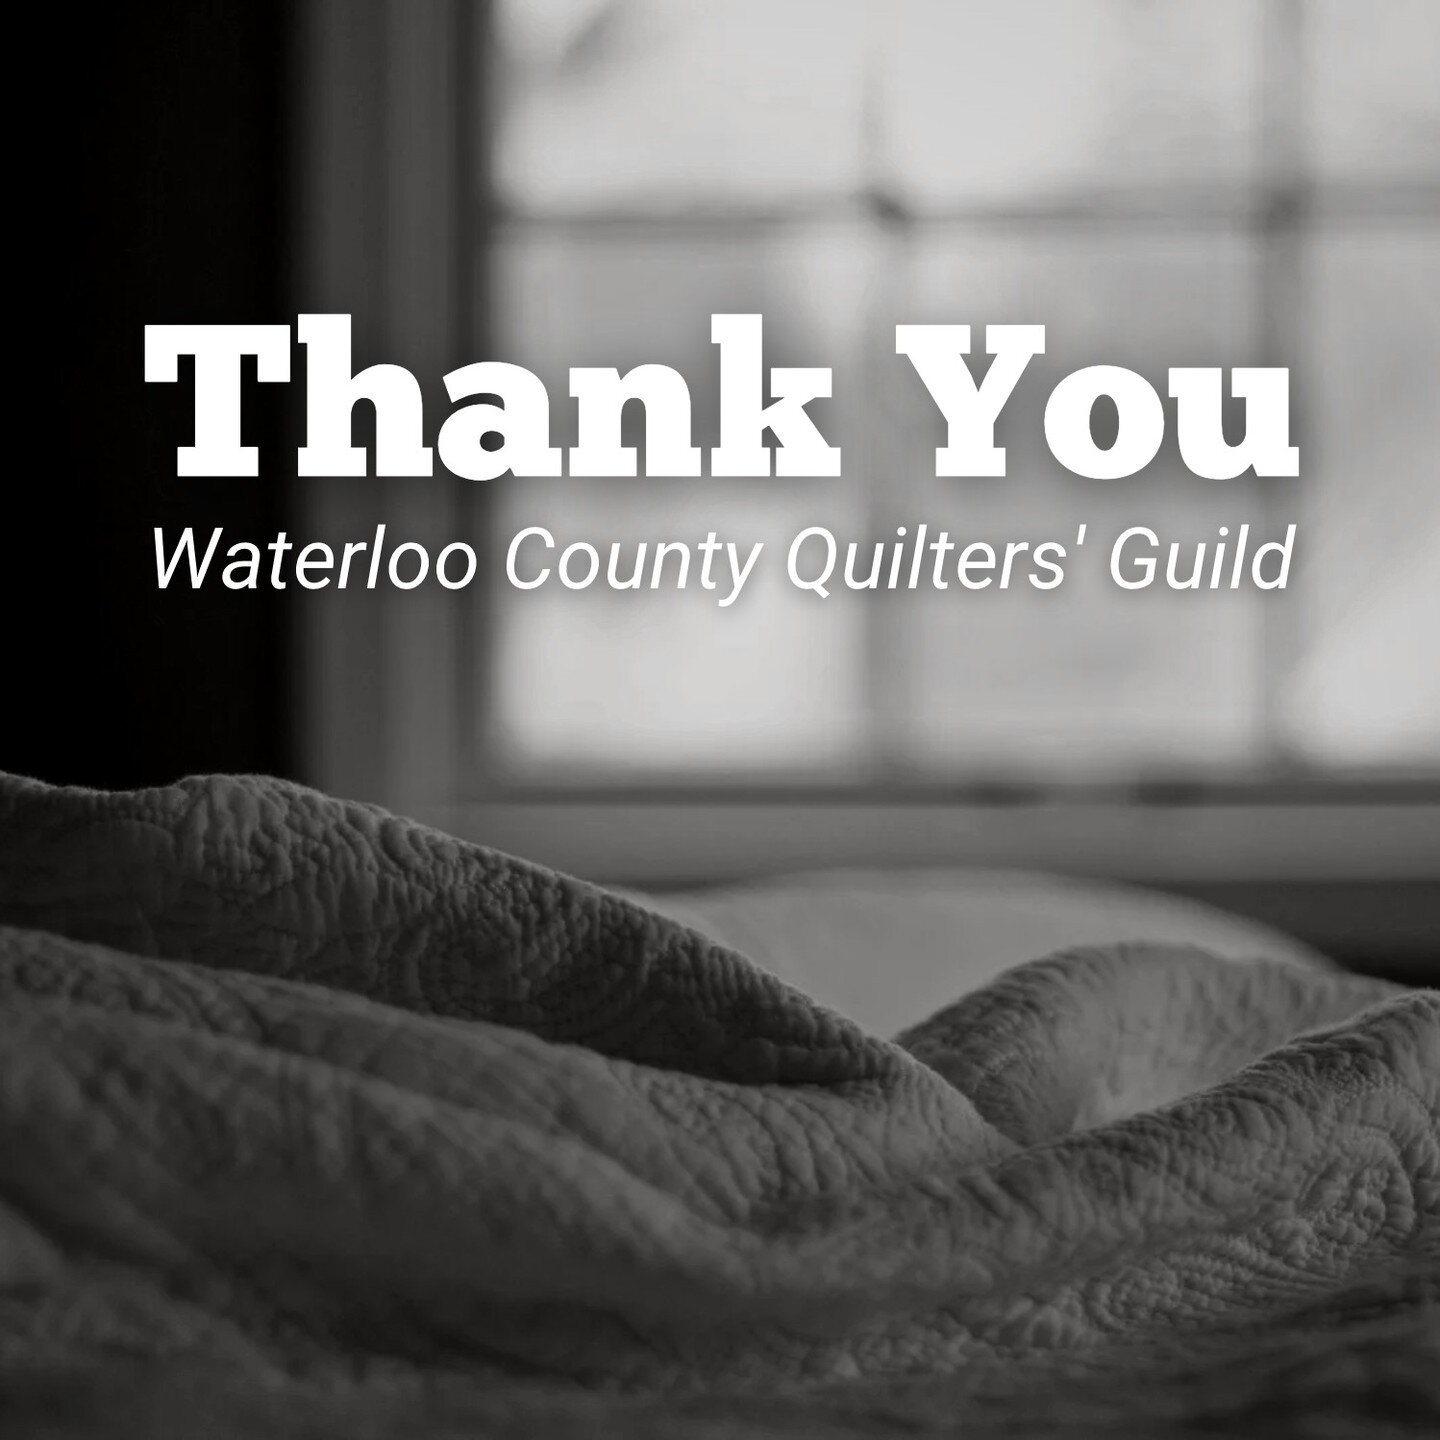 Thank you to the Waterloo County Quilters' Guild for their lovely donation to our #SupportiveHousing program, Next Steps Housing.⁠
⁠
The talented folks of the Waterloo County Quilters' Guild have donated 29 quilts to be used by youth who will soon be